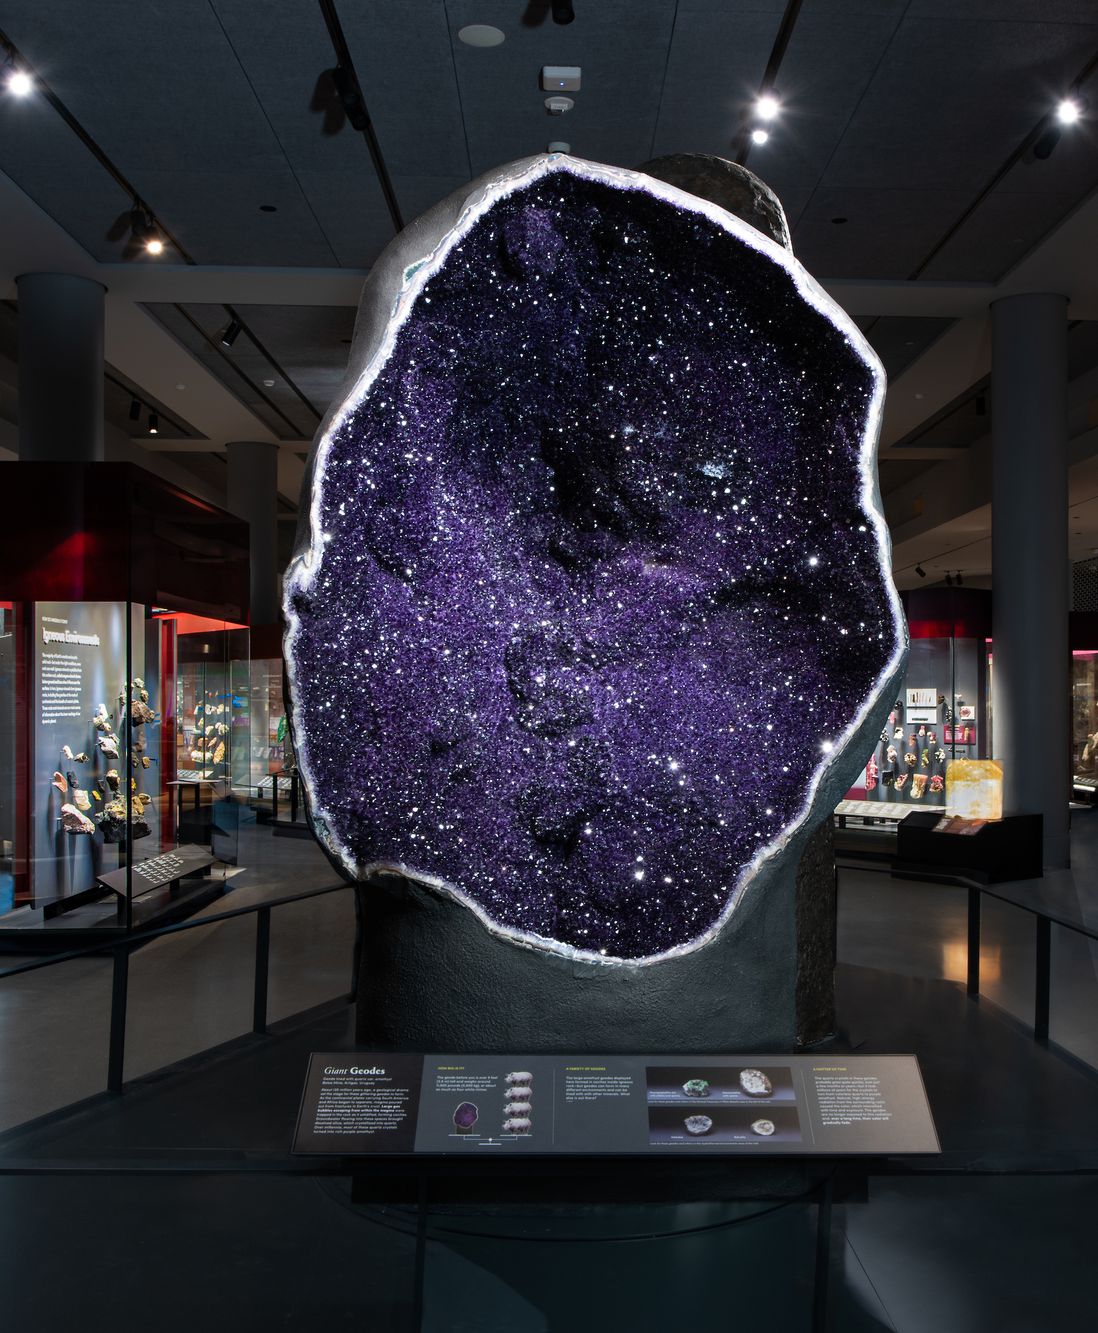 A huge open geode with sparkling purple stones inside